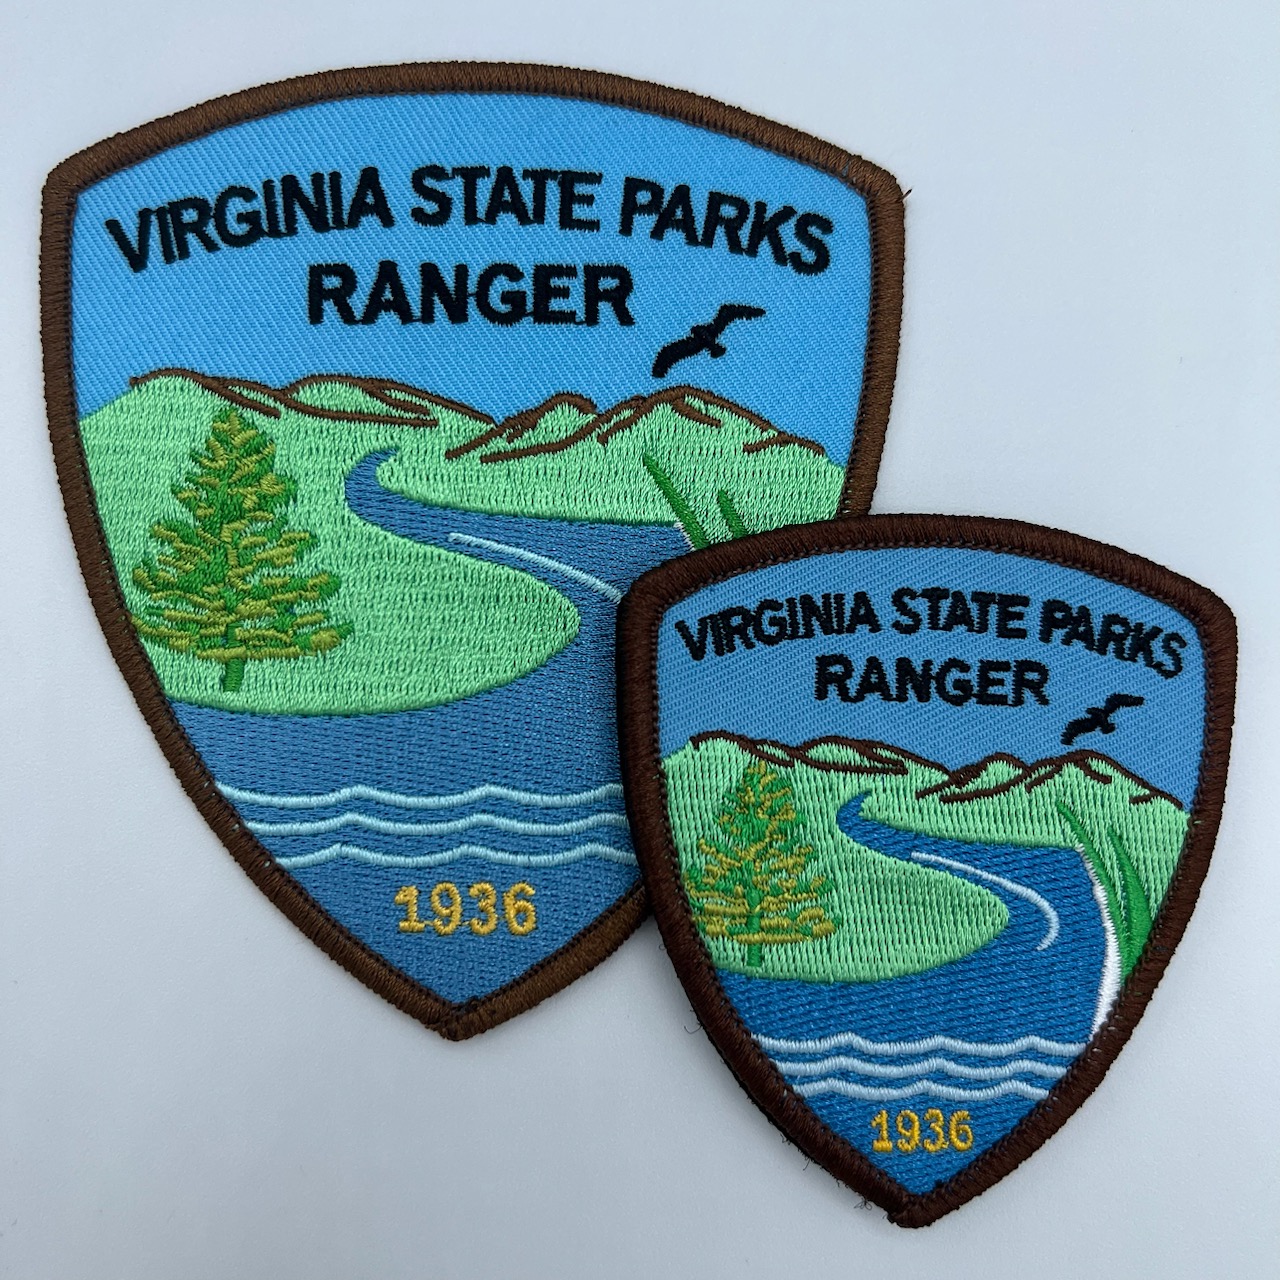 State Park Custom Patches - Virginia State Parks Ranger